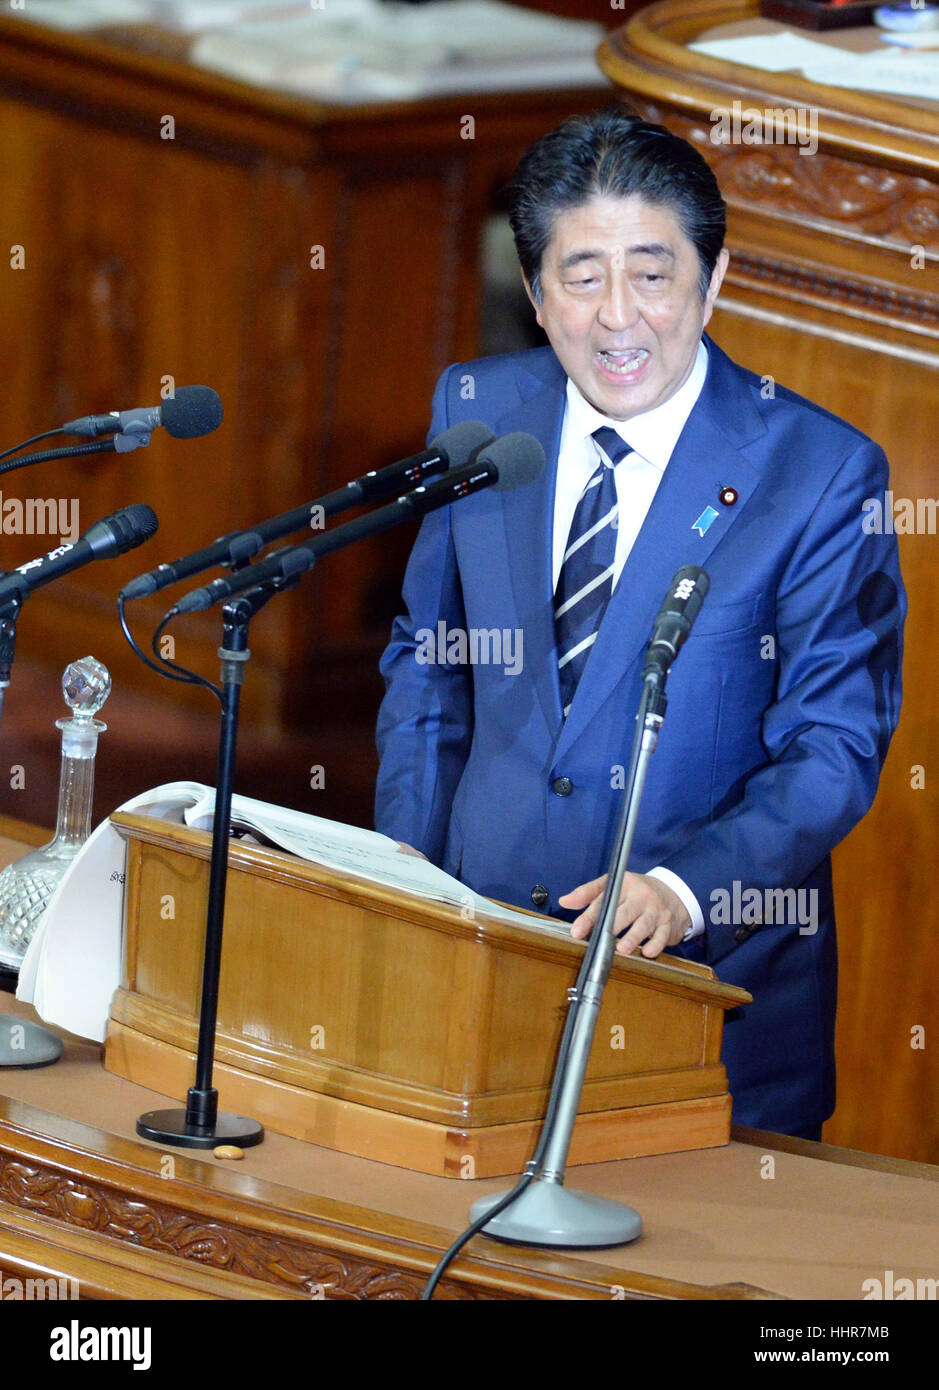 (170120) -- TOKYO, Jan. 20, 2017 (Xinhua) -- Japan's Prime Minister Shinzo Abe delivers a policy speech at the ordinary session of the National Diet in Tokyo, Japan, on Jan. 20, 2017. (Xinhua/Ma Ping) (gl) Stock Photo